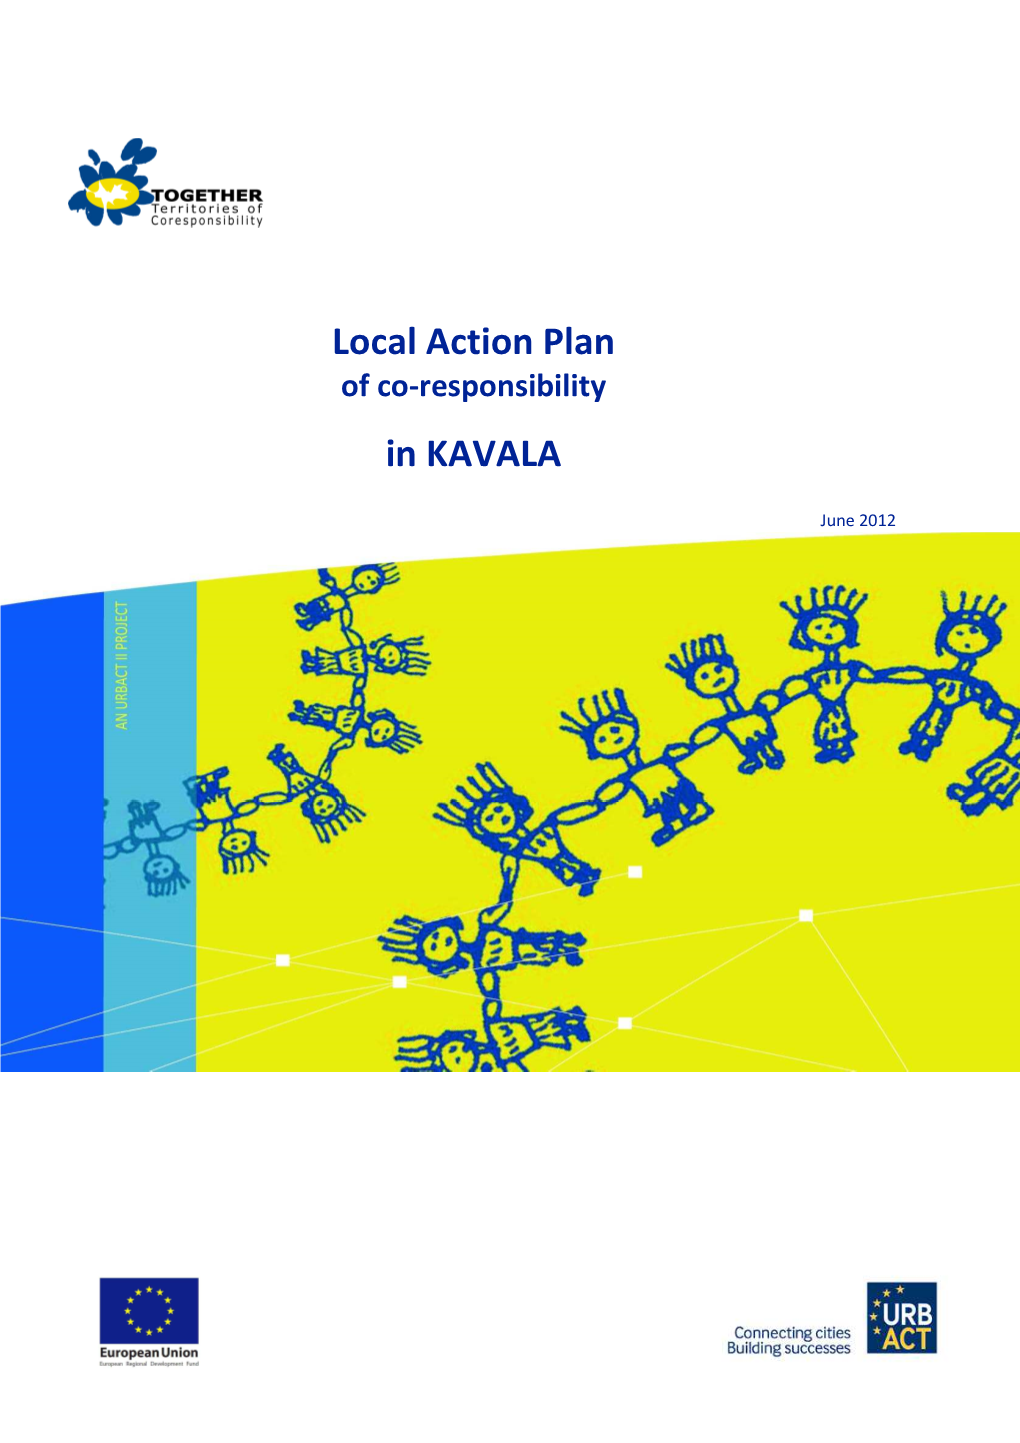 Local Action Plan in KAVALA